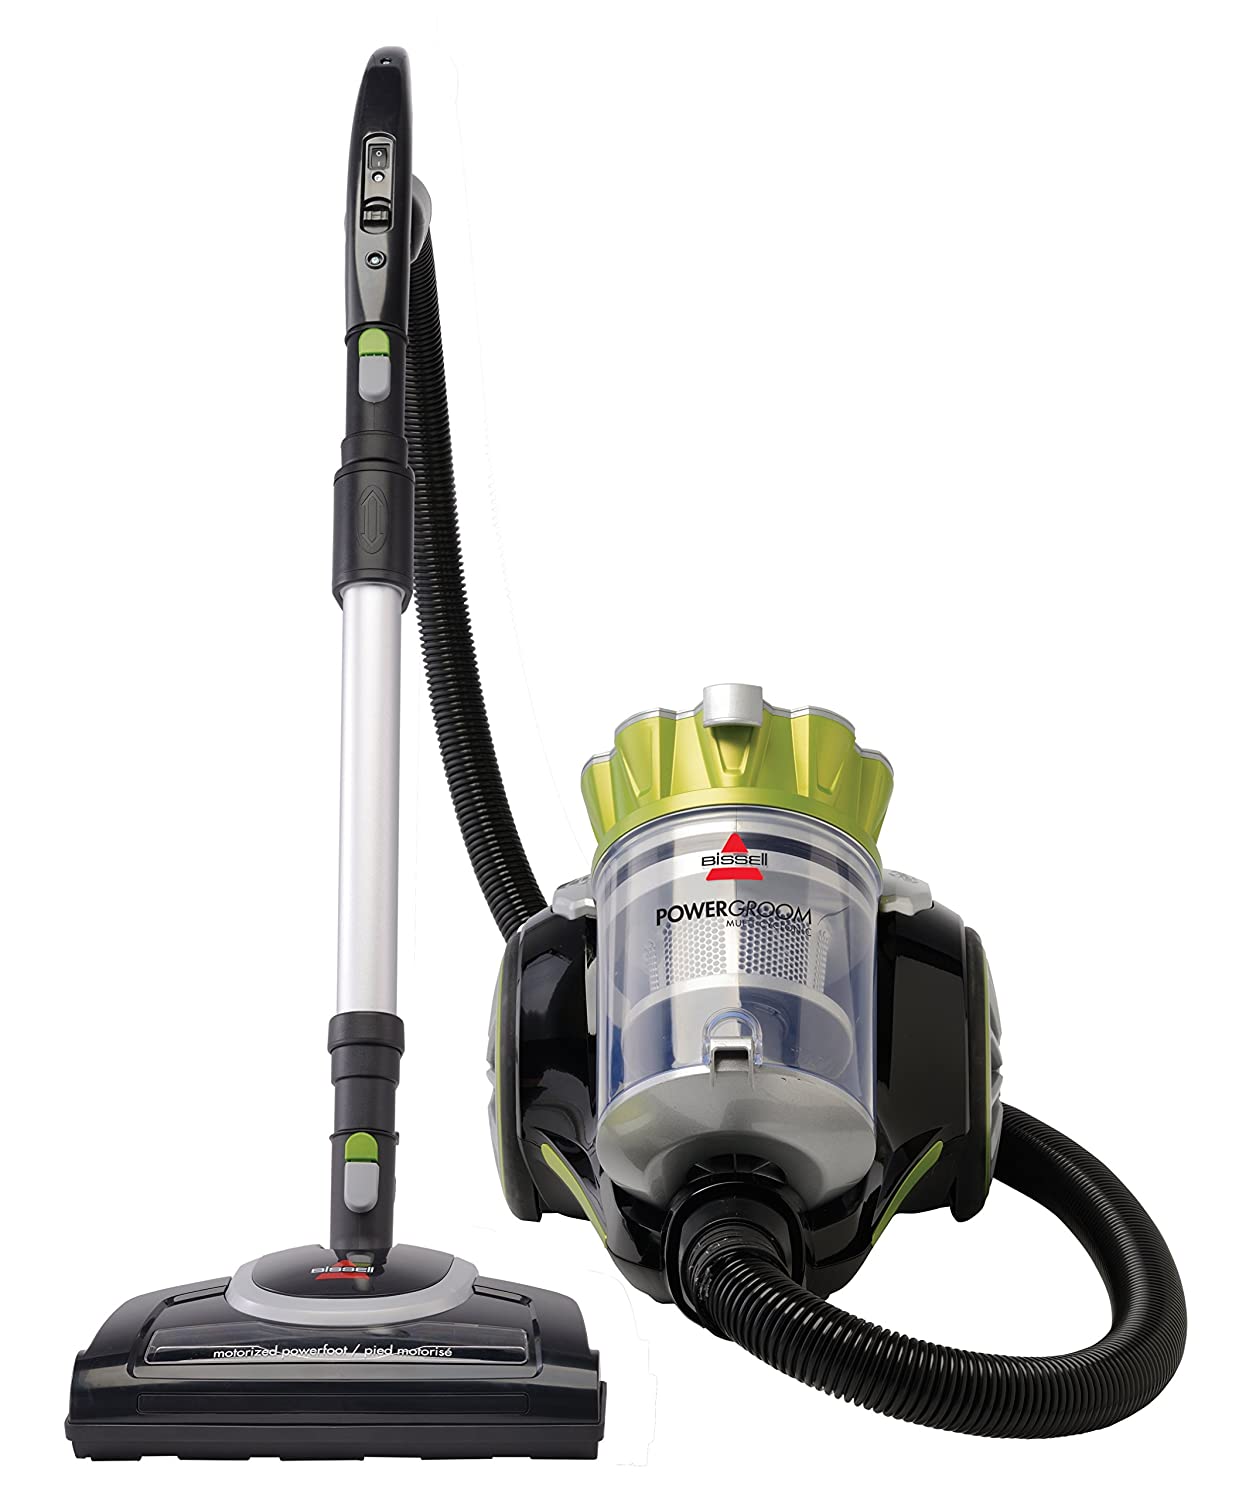 Bissell Powergroom Multicyclonic Bagless Canister Vacuum